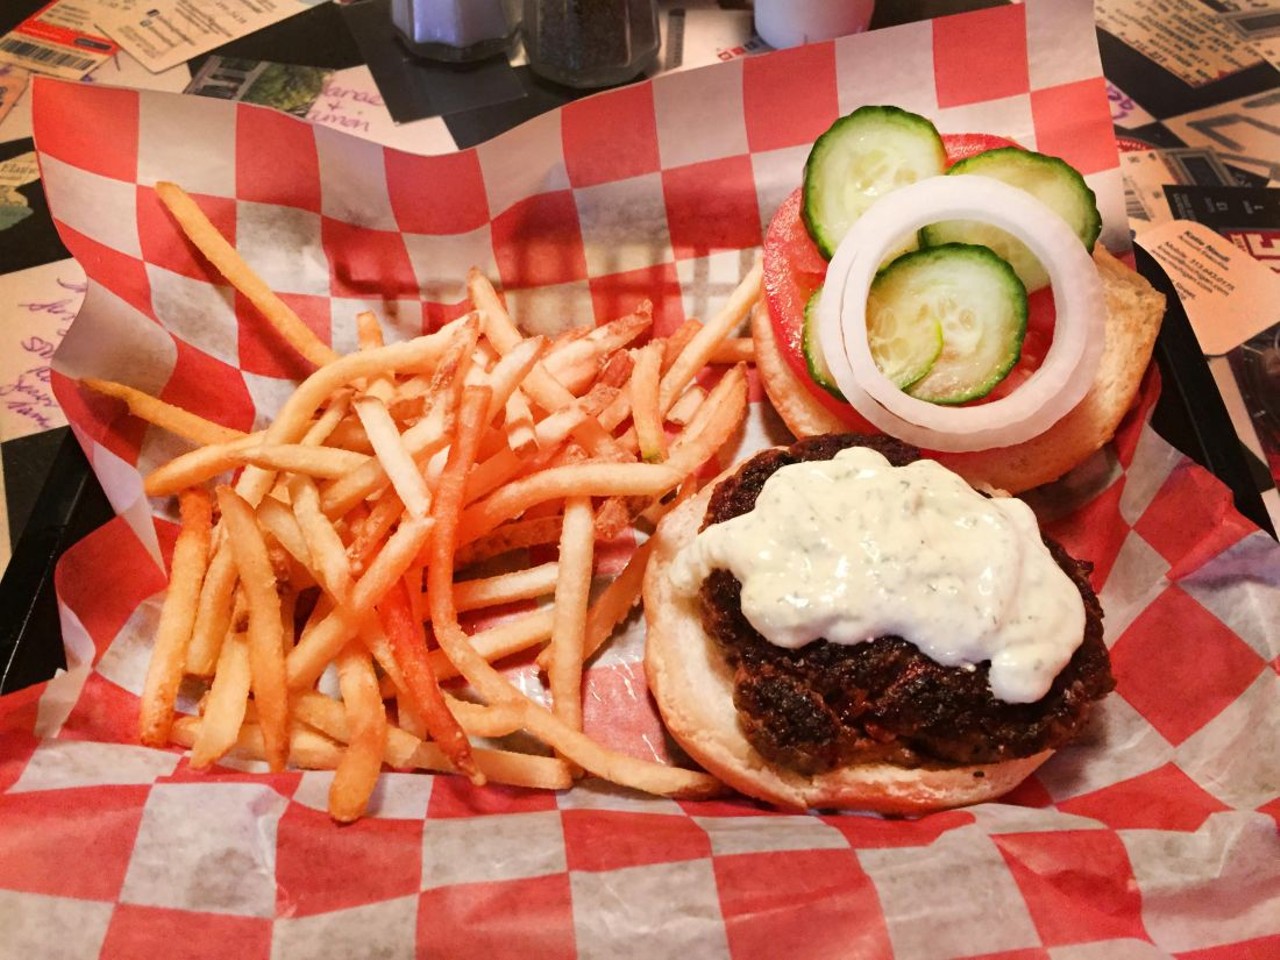 Checker Bar
124 Cadillac Square, Detroit
The Checker Bar's Mount Olympus introduced us to the wonderful concept of a lamb burger. It's made with fresh ground lamb that's stuffed with feta cheese, cucumber, onion, and house made tzatziki sauce.